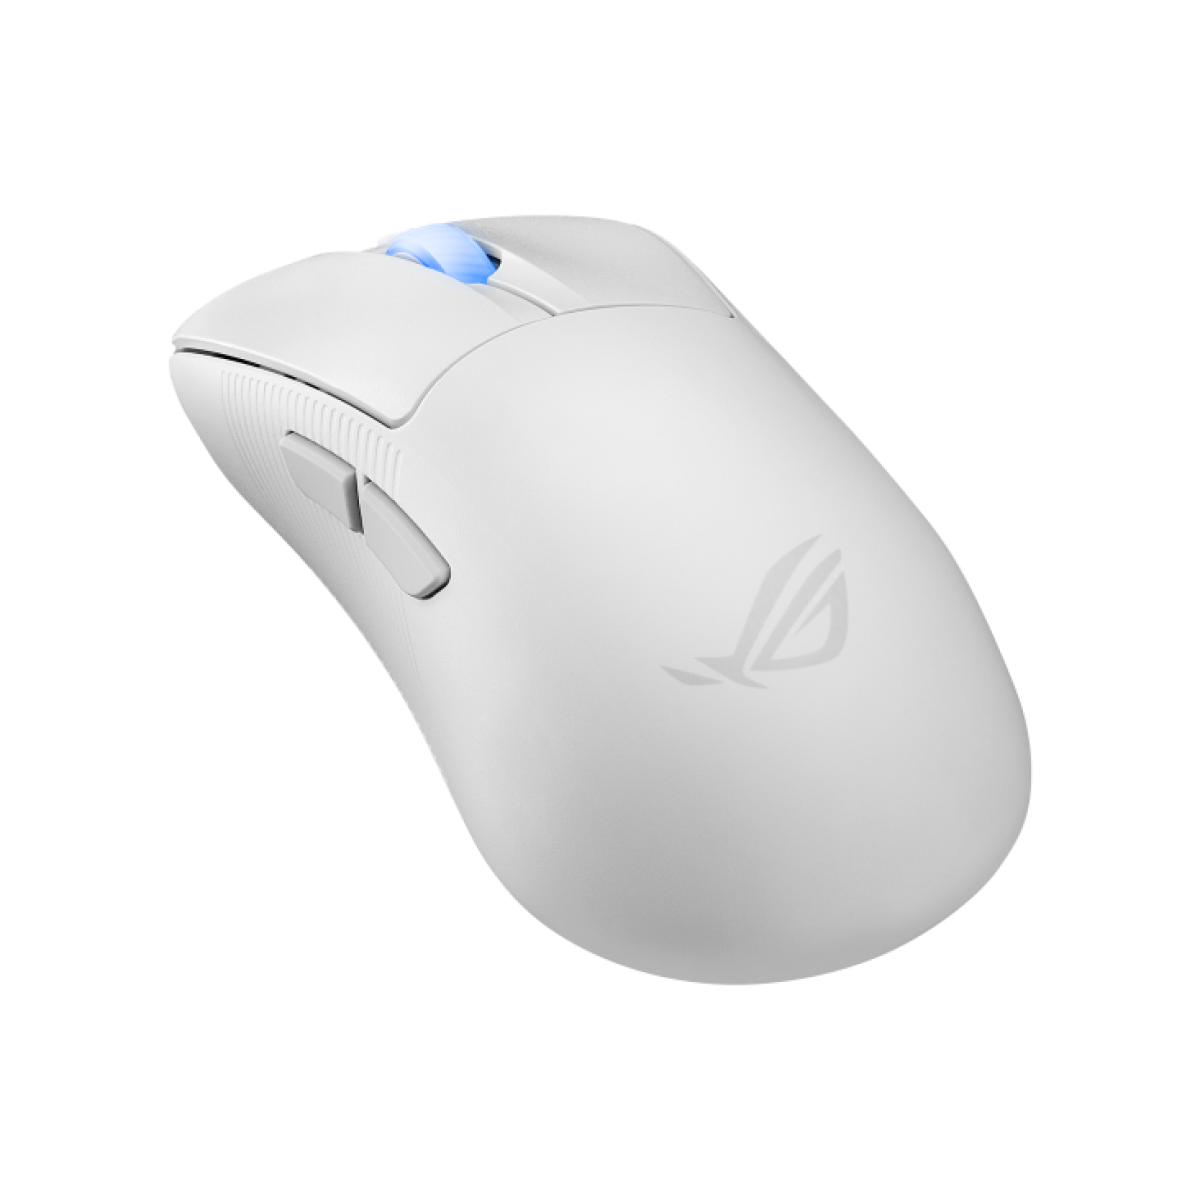 ASUS ROG Keris II Ace Wireless AimPoint White Gaming Maus 1